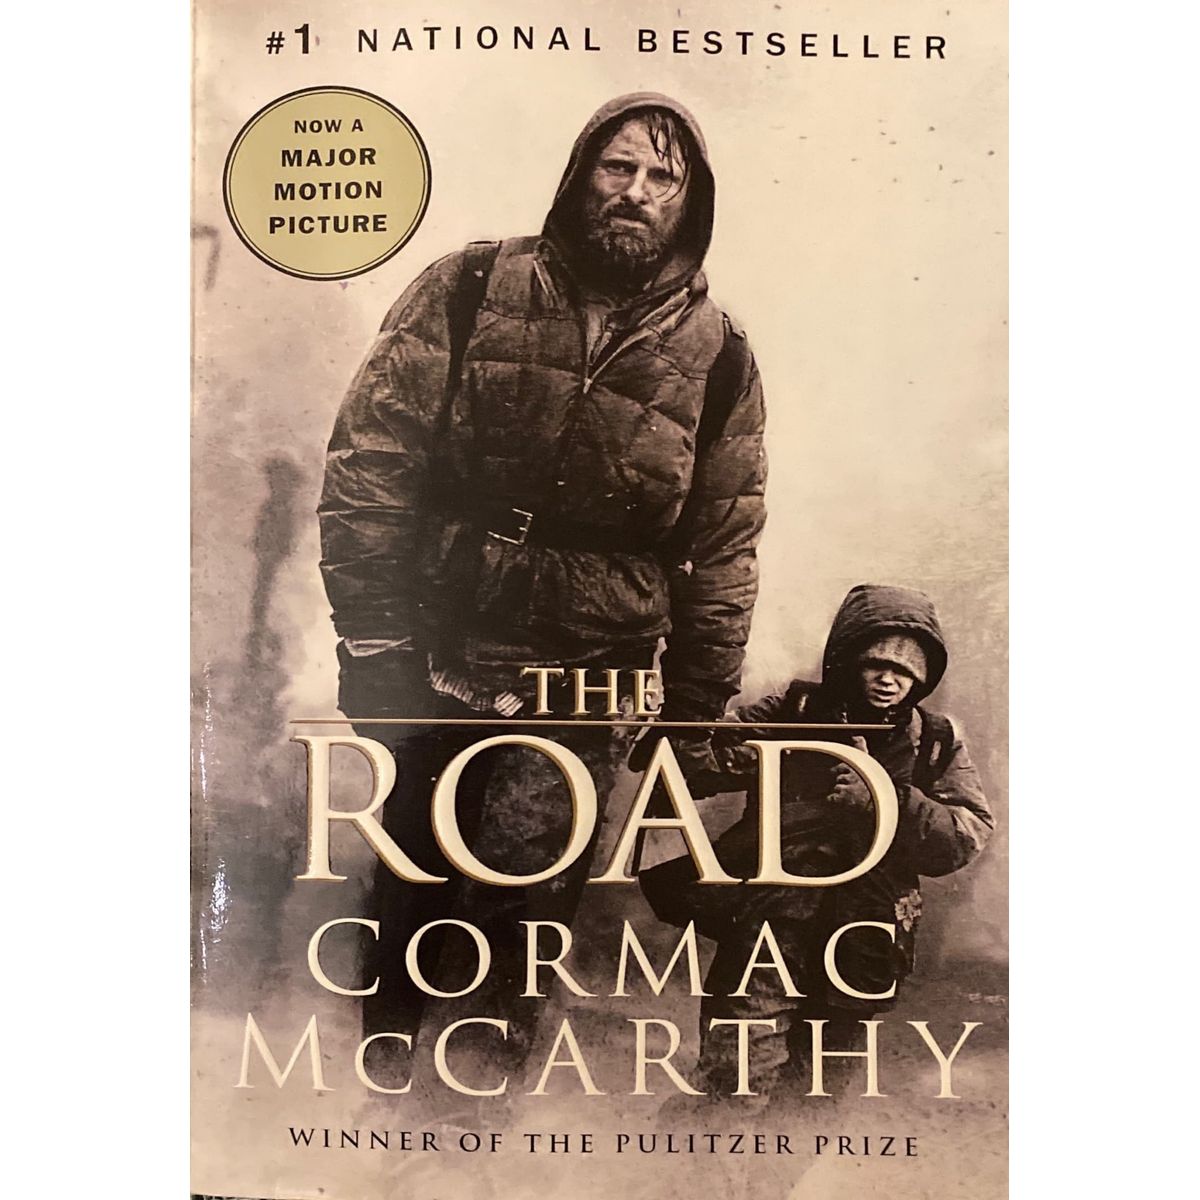 ISBN: 9780307476302 / 0307476308 - The Road by Cormac McCarthy, Movie Tie-in Edition [2009]